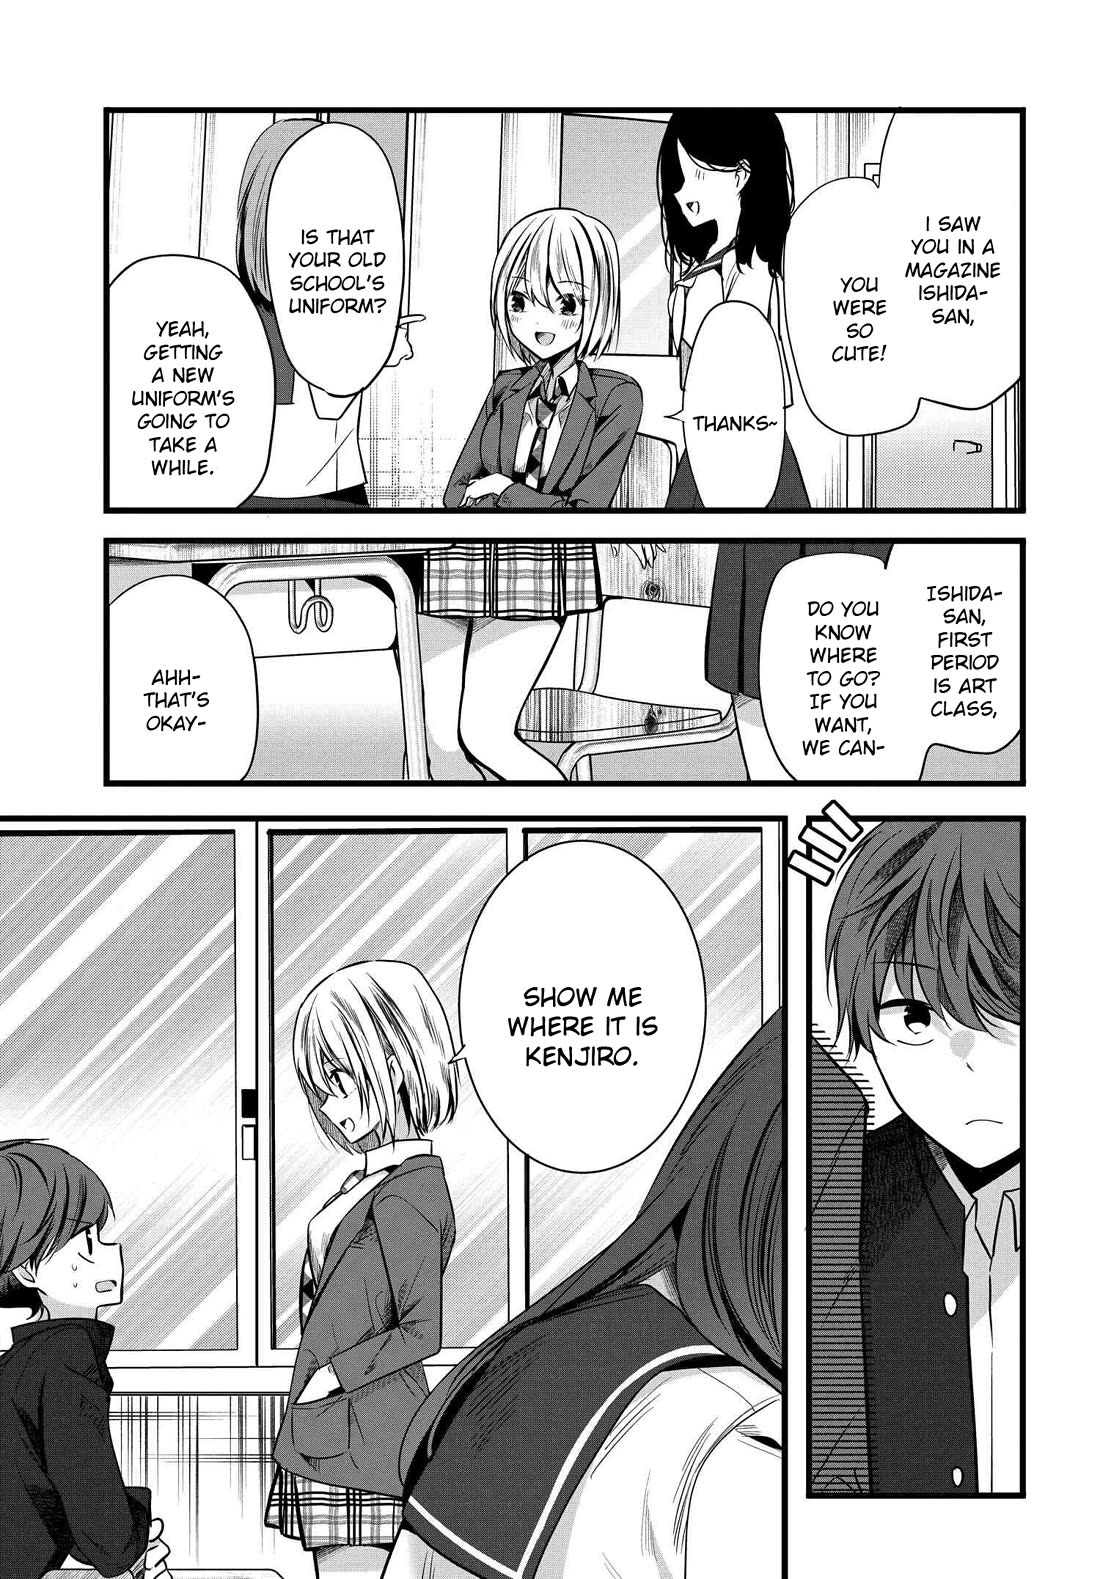 Tozaki-san Is Cold Only to Me - chapter 5 - #3